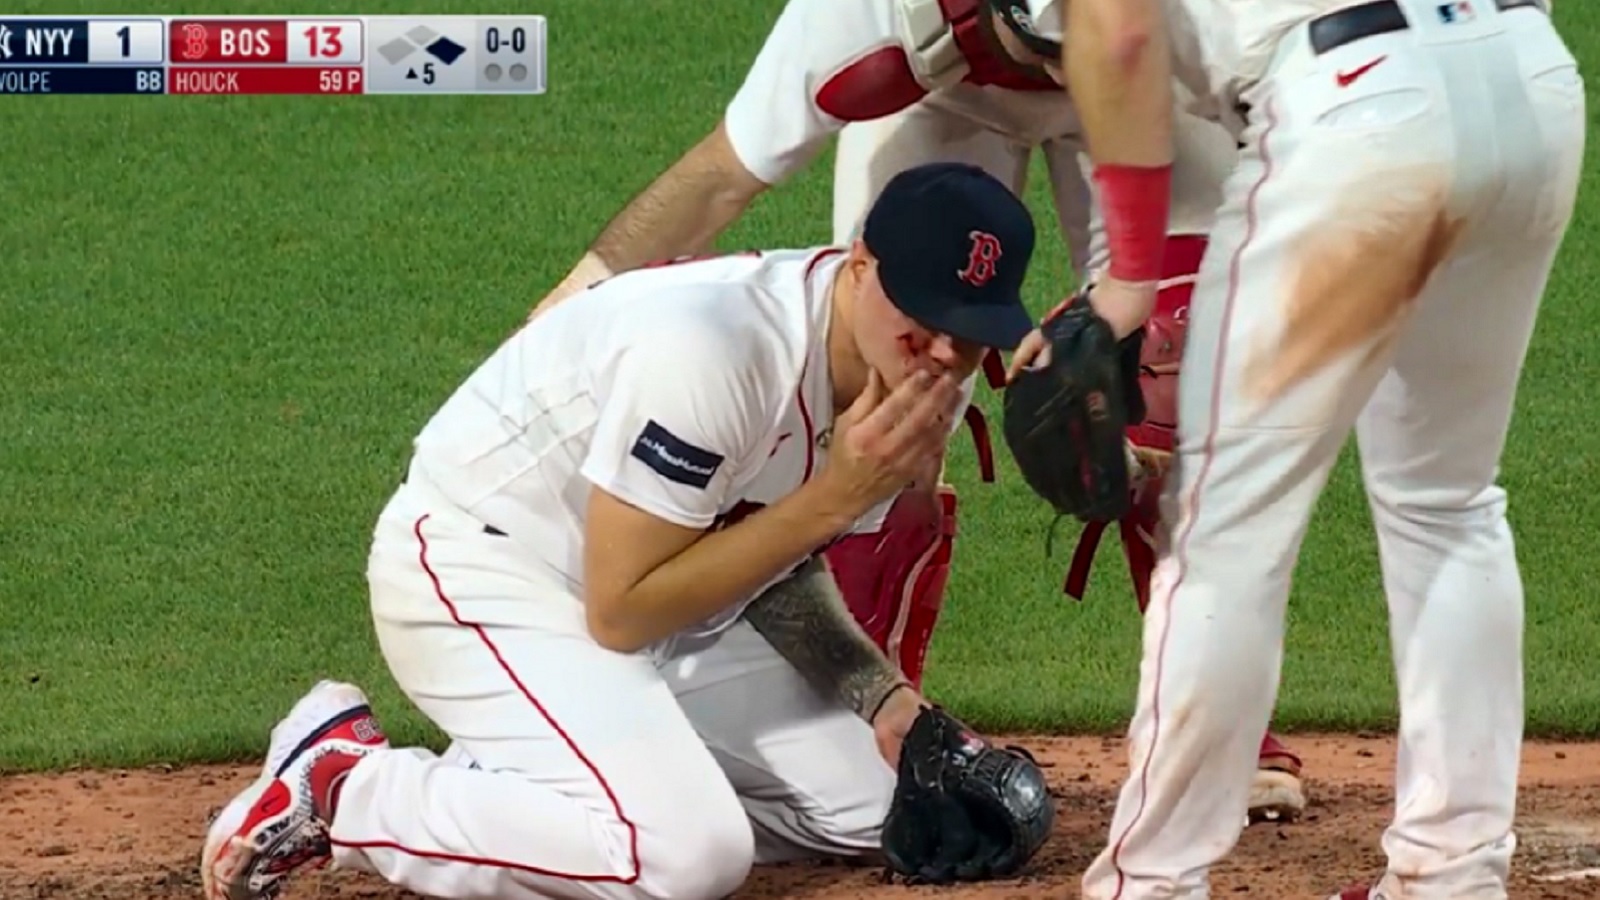 Red Sox pitcher avoids serious injury despite being hit by ball in